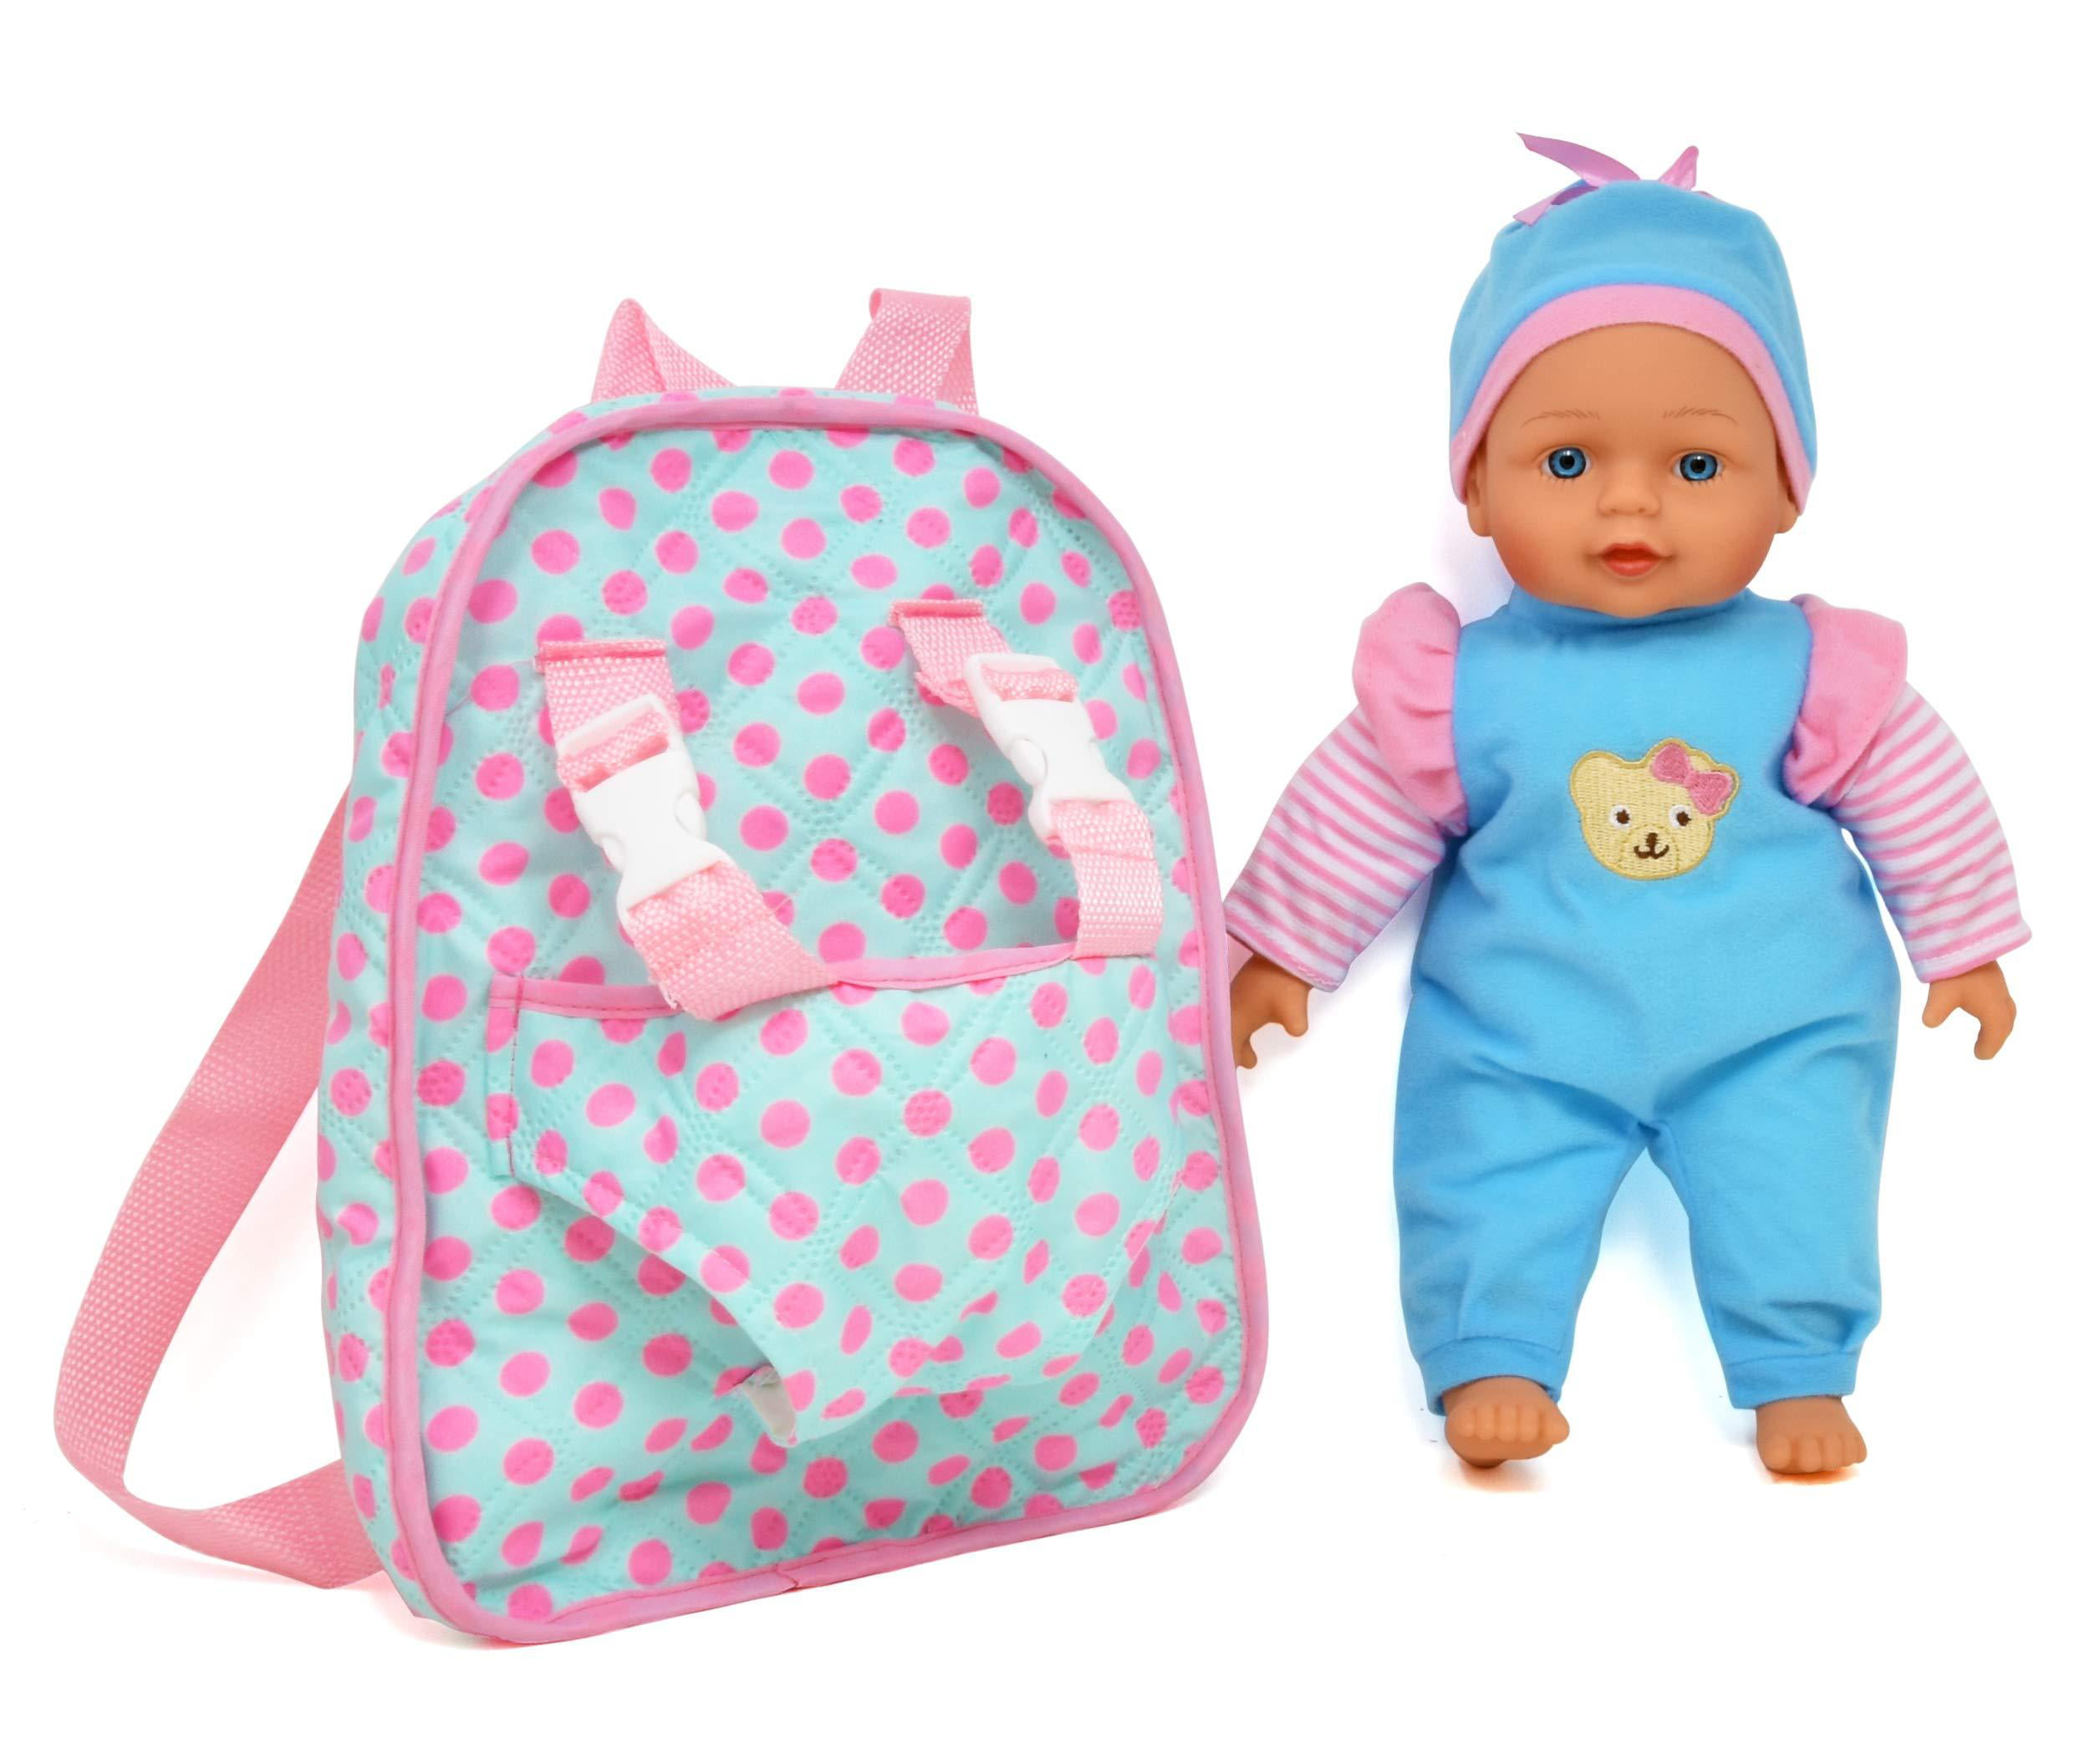 Briefcase Pocket Fits Doll Accessories and Clothing African American 12 Inch Dolls To Play Soft Baby Doll With Take Along Pink Doll Backpack Carrier